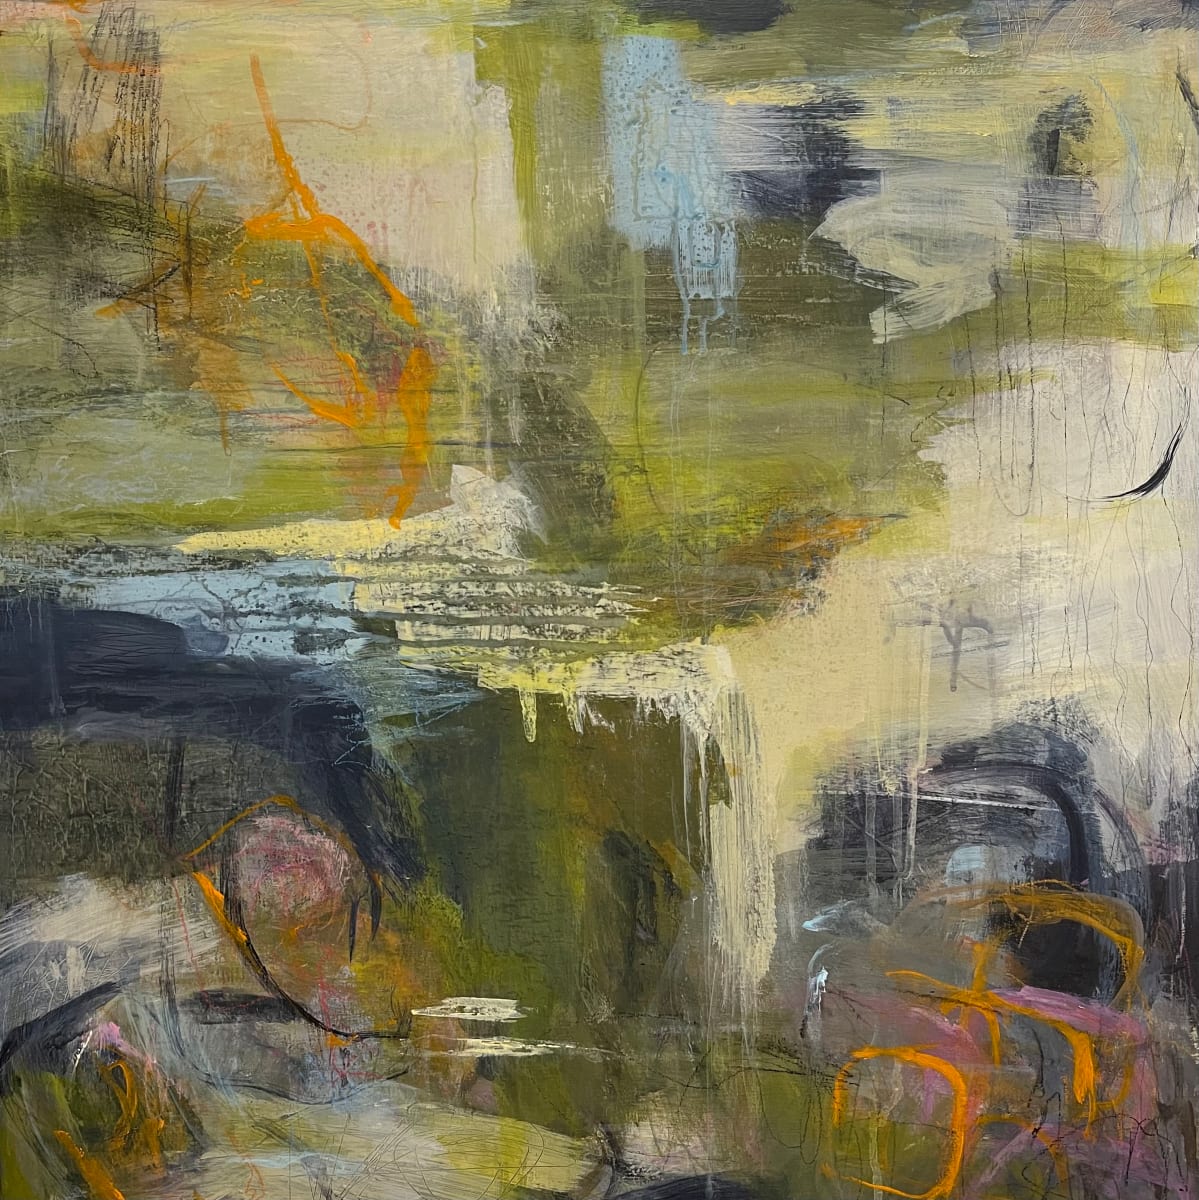 Creek, No Paddle by Kelly Dillard  Image: Have you ever  felt like you were up a creek with no paddle?  Sometimes you just have to keep paddling to make it thru the rough waters.  This abstract painting is inspired by paddling in rocky water. Abstract expressionism in earth tones of greens, grey, blue, and yellow.